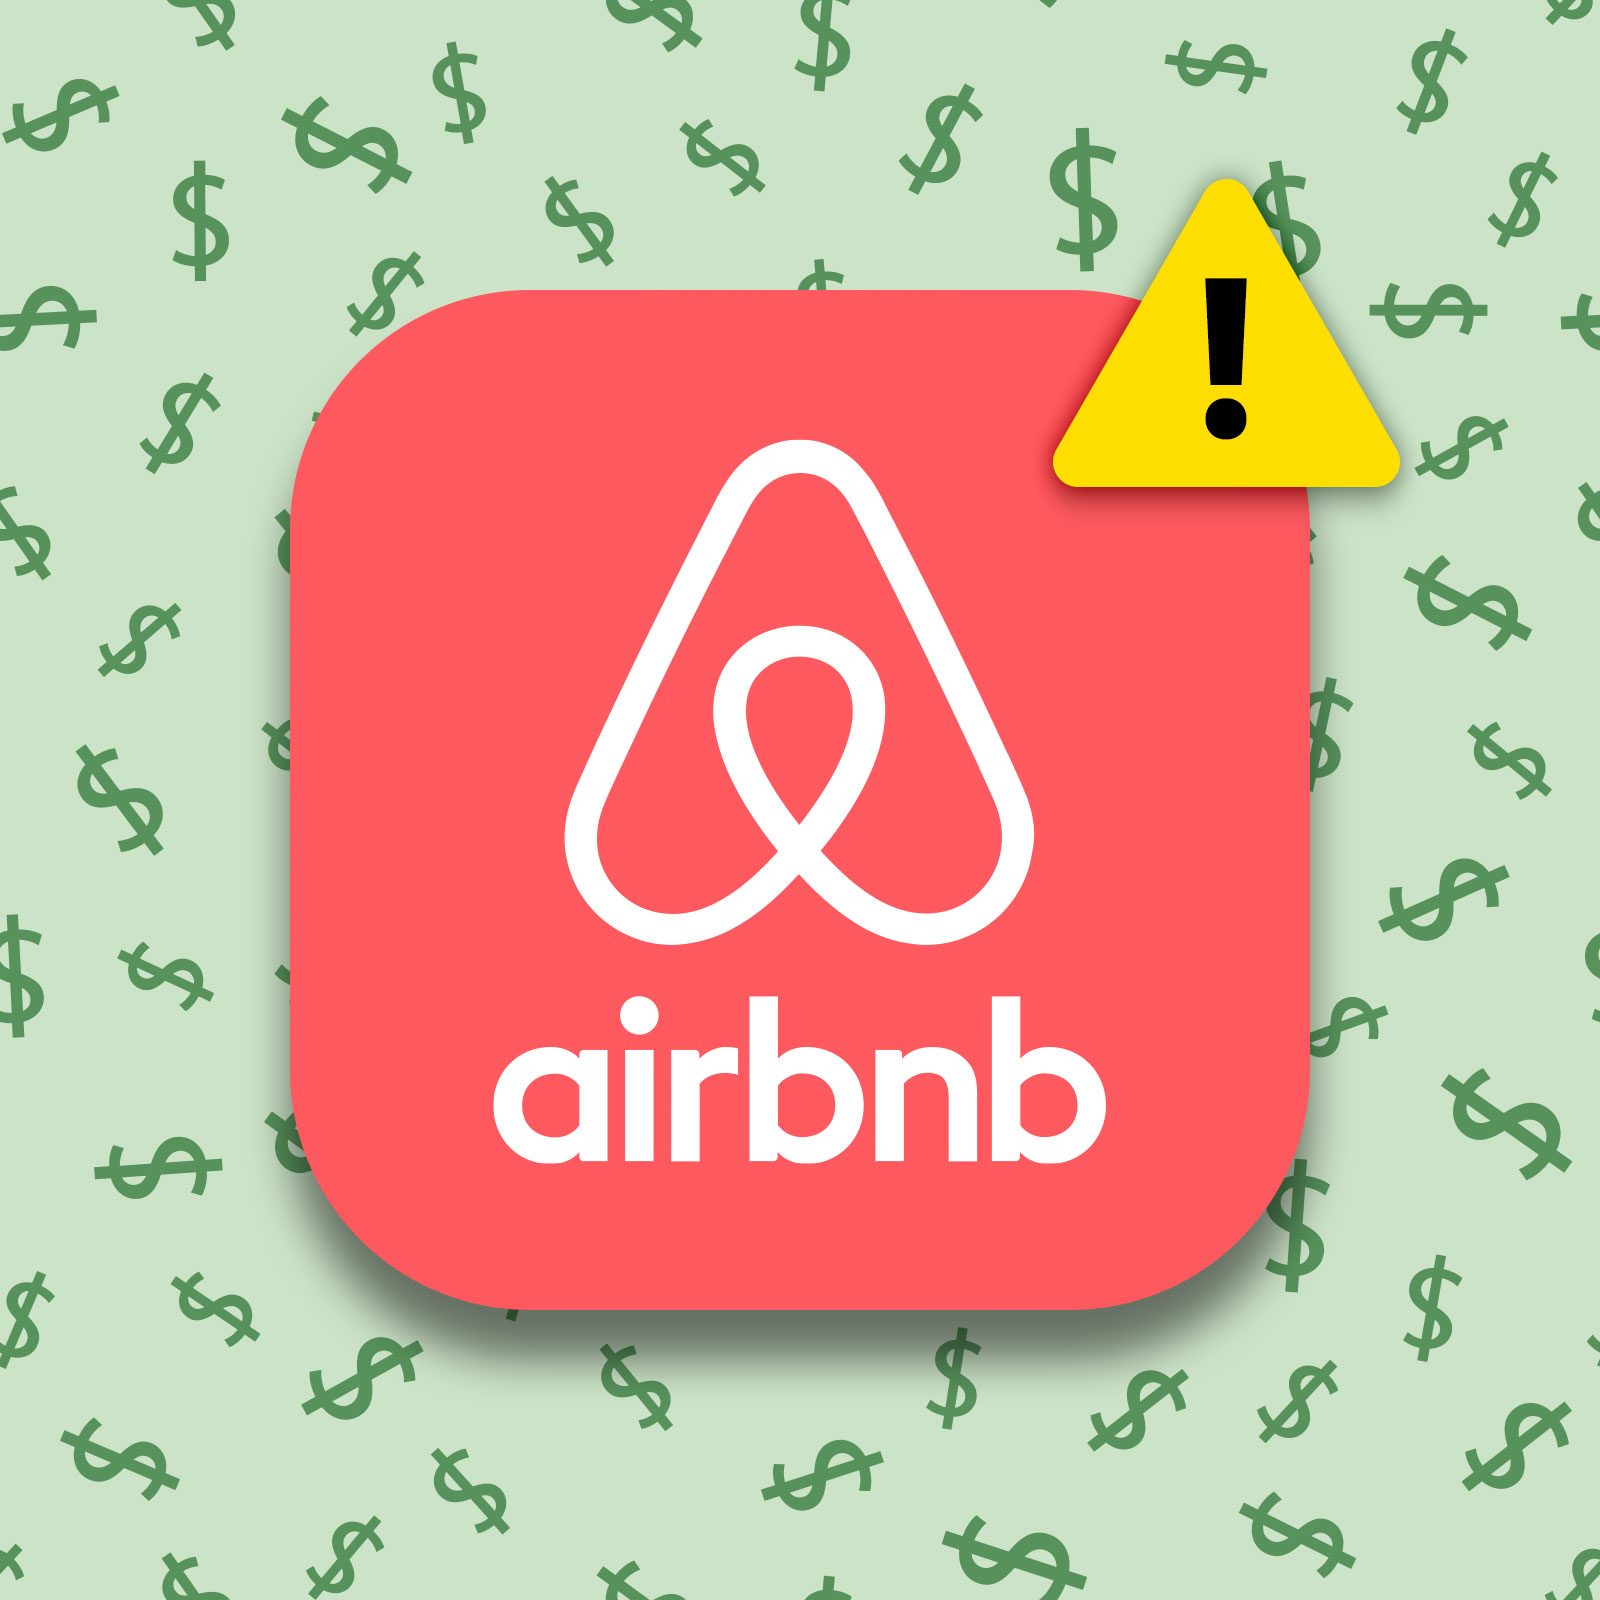 can you use a fake id on airbnb